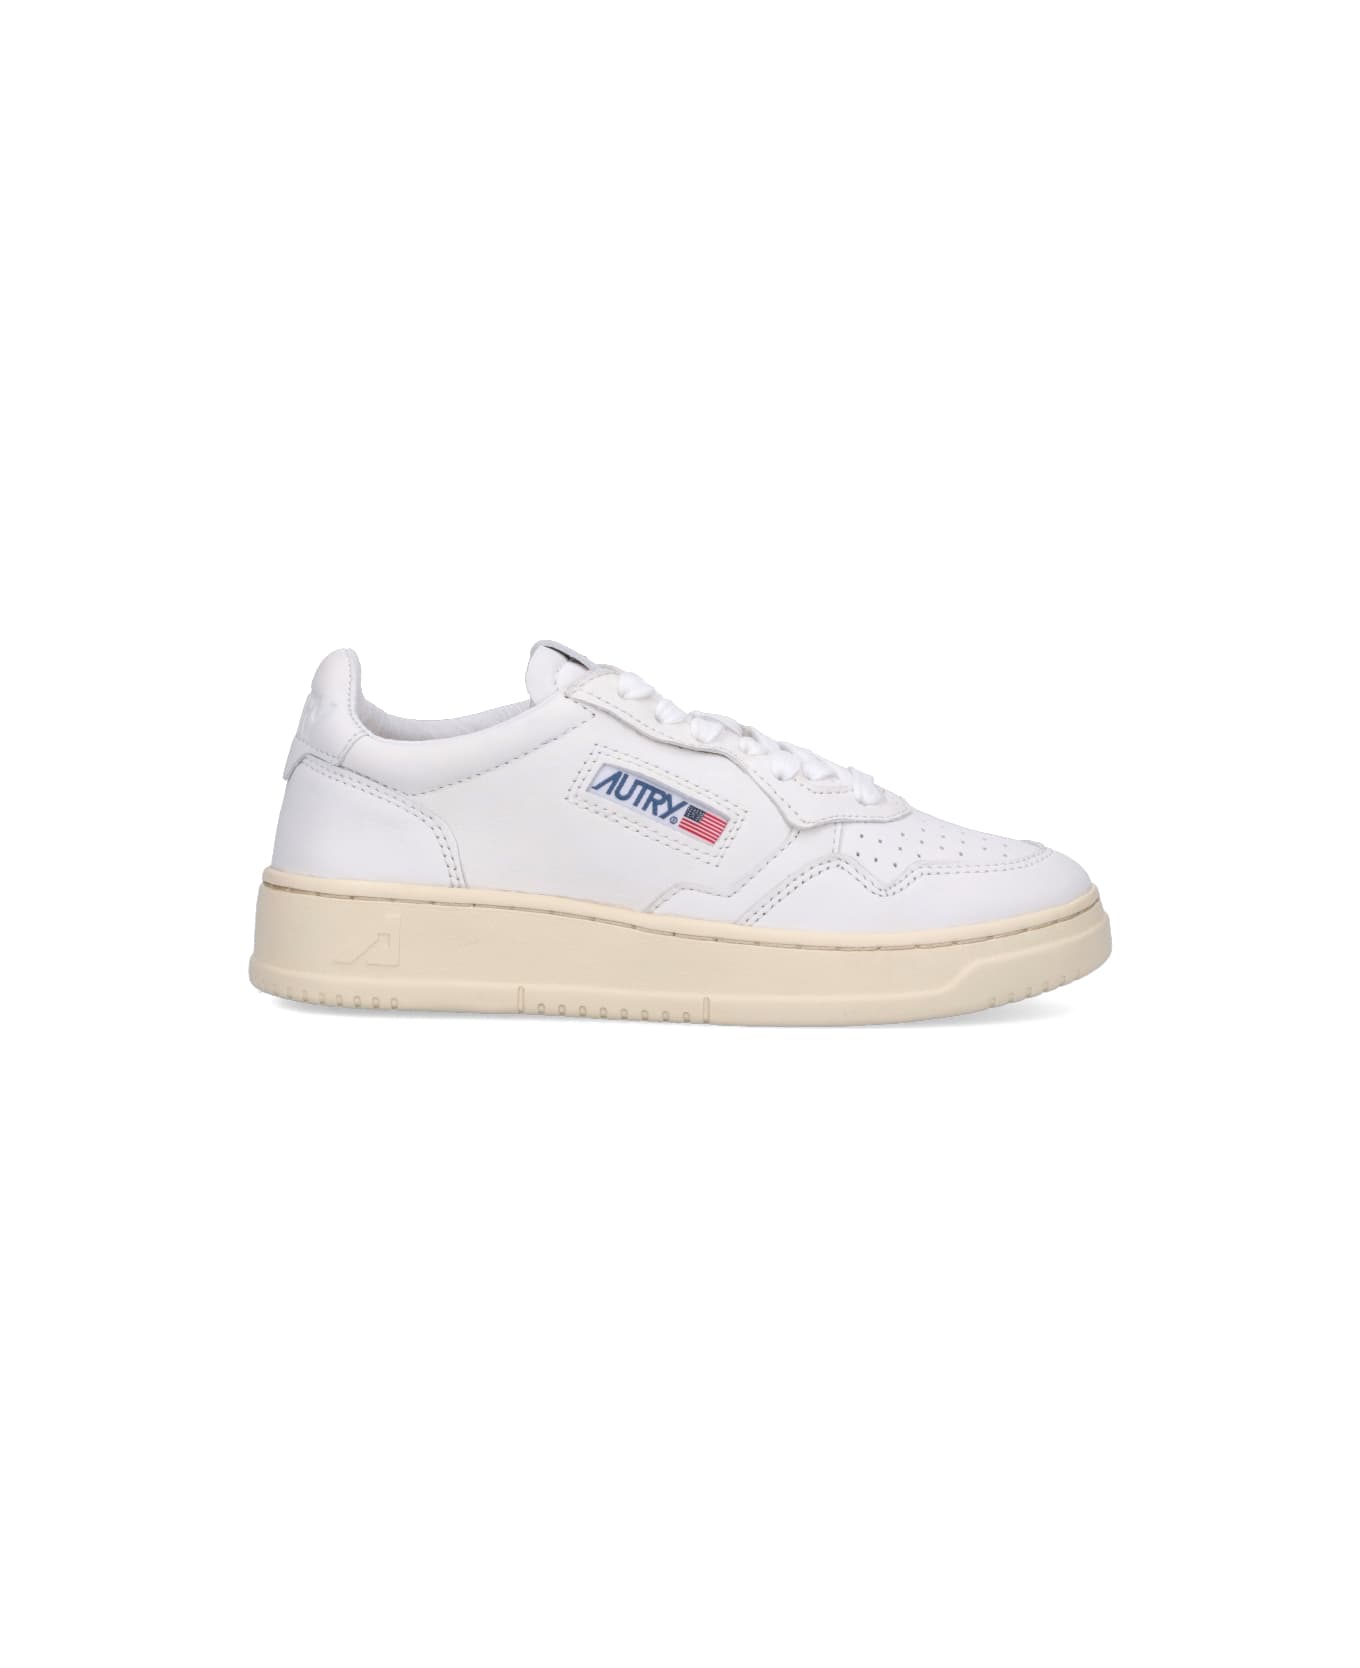 Autry "medalist" Low Sneakers - White スニーカー